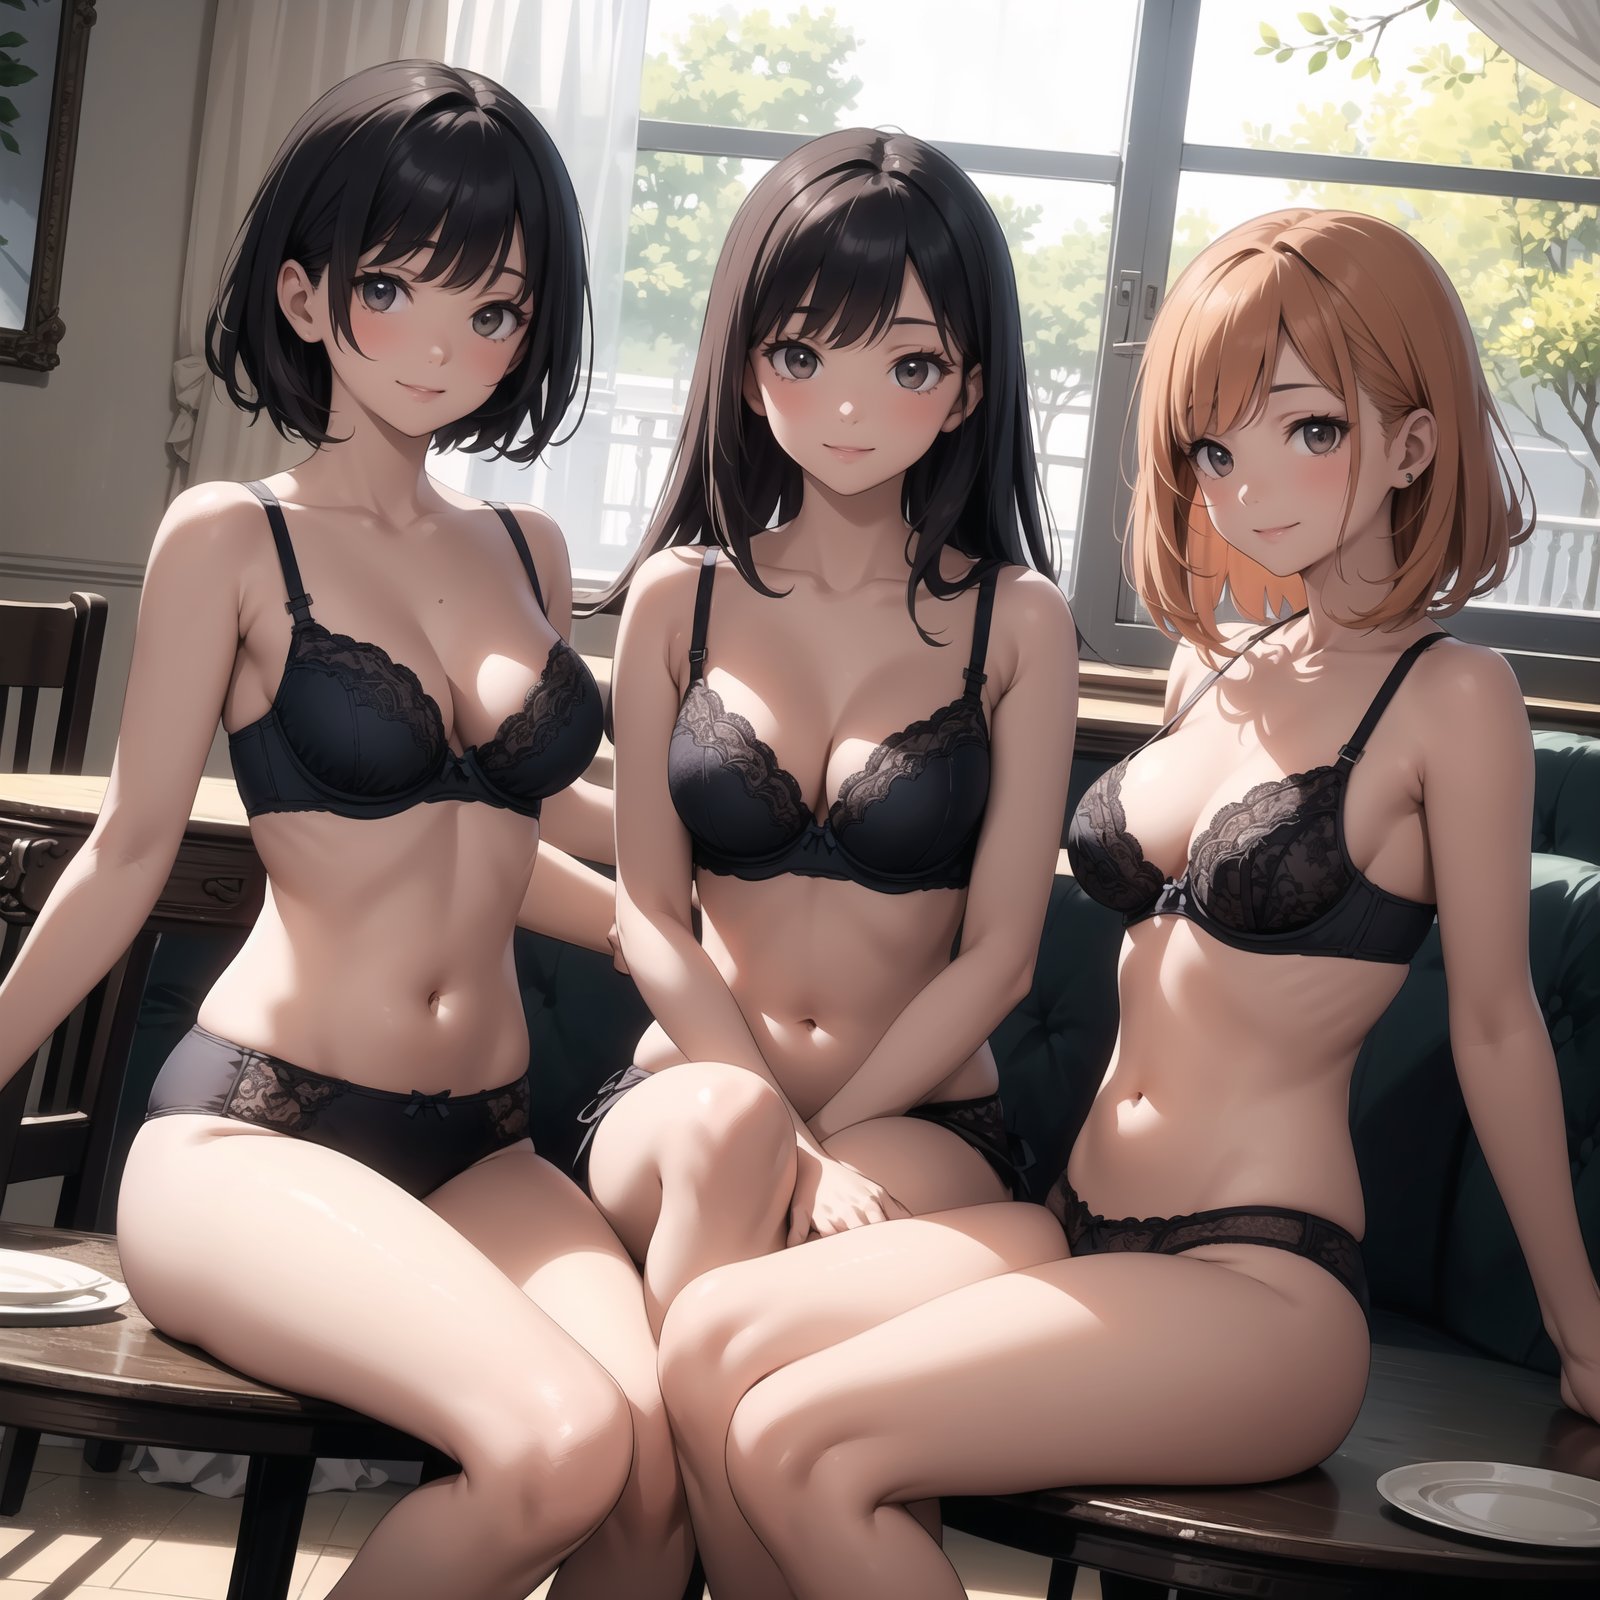 (masterpiece, best quality), female ageless, hazel eyes, protruding ears, deviated septum nose,round cheeks,auburn side-swept bangs hair, smile wearing triangle bra, plunge bra,sitting pose with legs spread, sitting with legs slightly spread, showcasing confidence and allure, silhouettes, characters outlined against a bright background, evoking intimacy without explicit details, sisters gathering, with a beautifully set table and heartfelt conversations